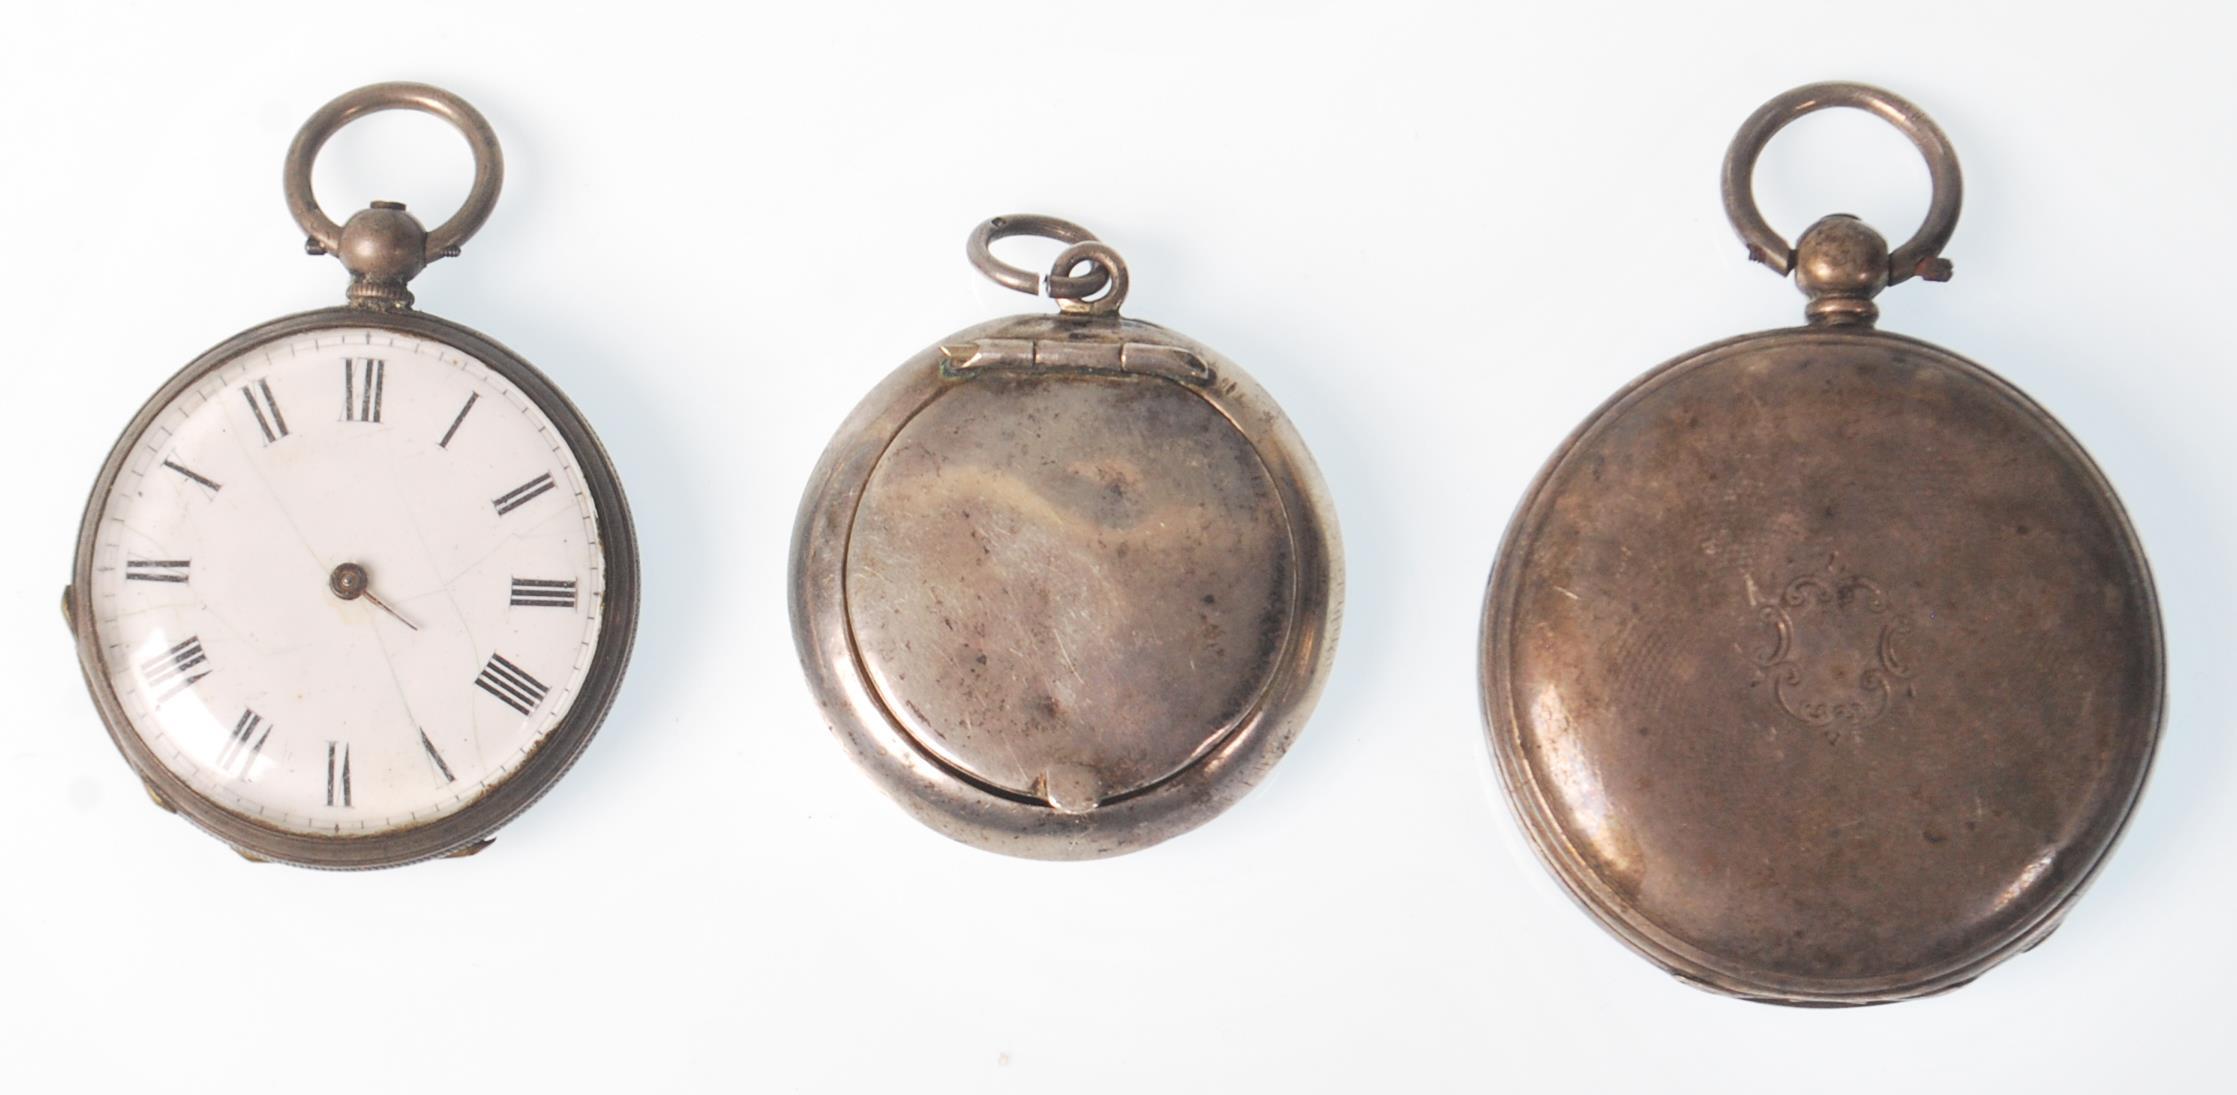 An early 20th Century Edwardian pocket fob watch having a white enamelled face with roman numerals